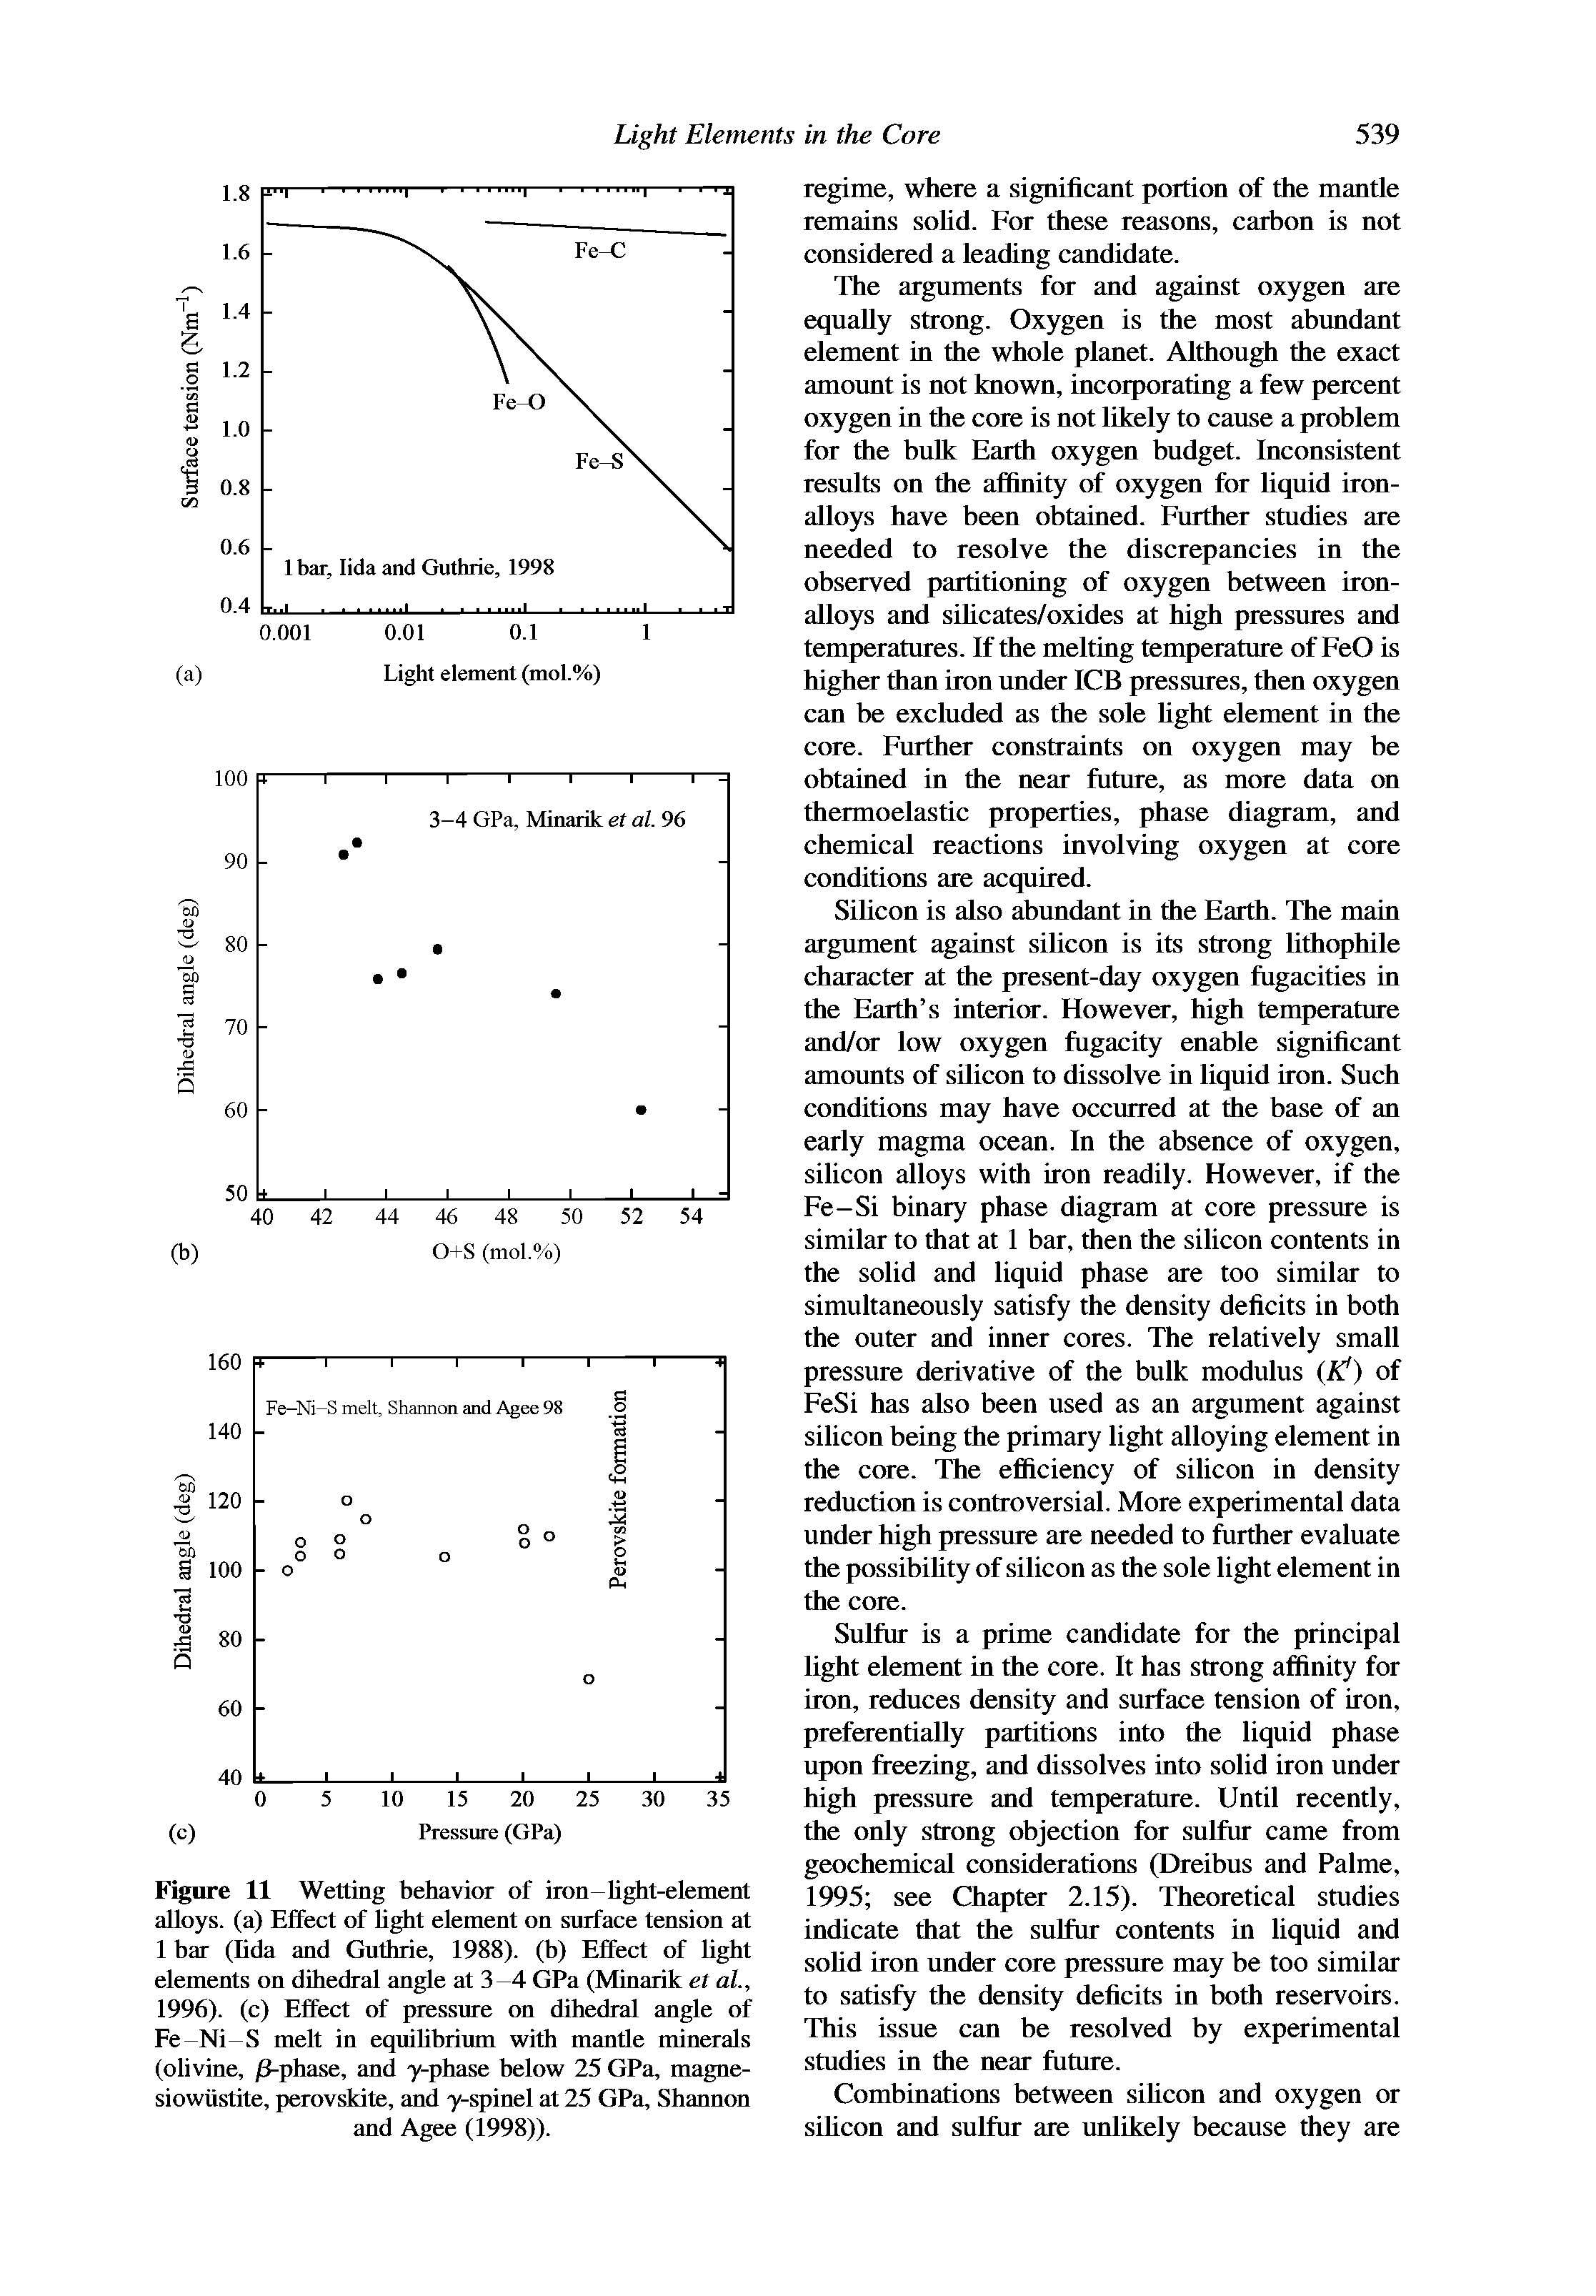 Figure 11 Wetting behavior of iron-Ught-element alloys, (a) Effect of bght element on surface tension at 1 bar (lida and Guthrie, 1988). (b) Effect of light elements on dihedral angle at 3-4 GPa (Minarik et at., 1996). (c) Effect of pressure on dihedral angle of Fe-Ni-S melt in equilibrium with mantle minerals (olivine, )8-phase, and y-phase below 25 GPa, magne-siowustite, perovskite, and y-spinel at 25 GPa, Shannon and Agee (1998)).